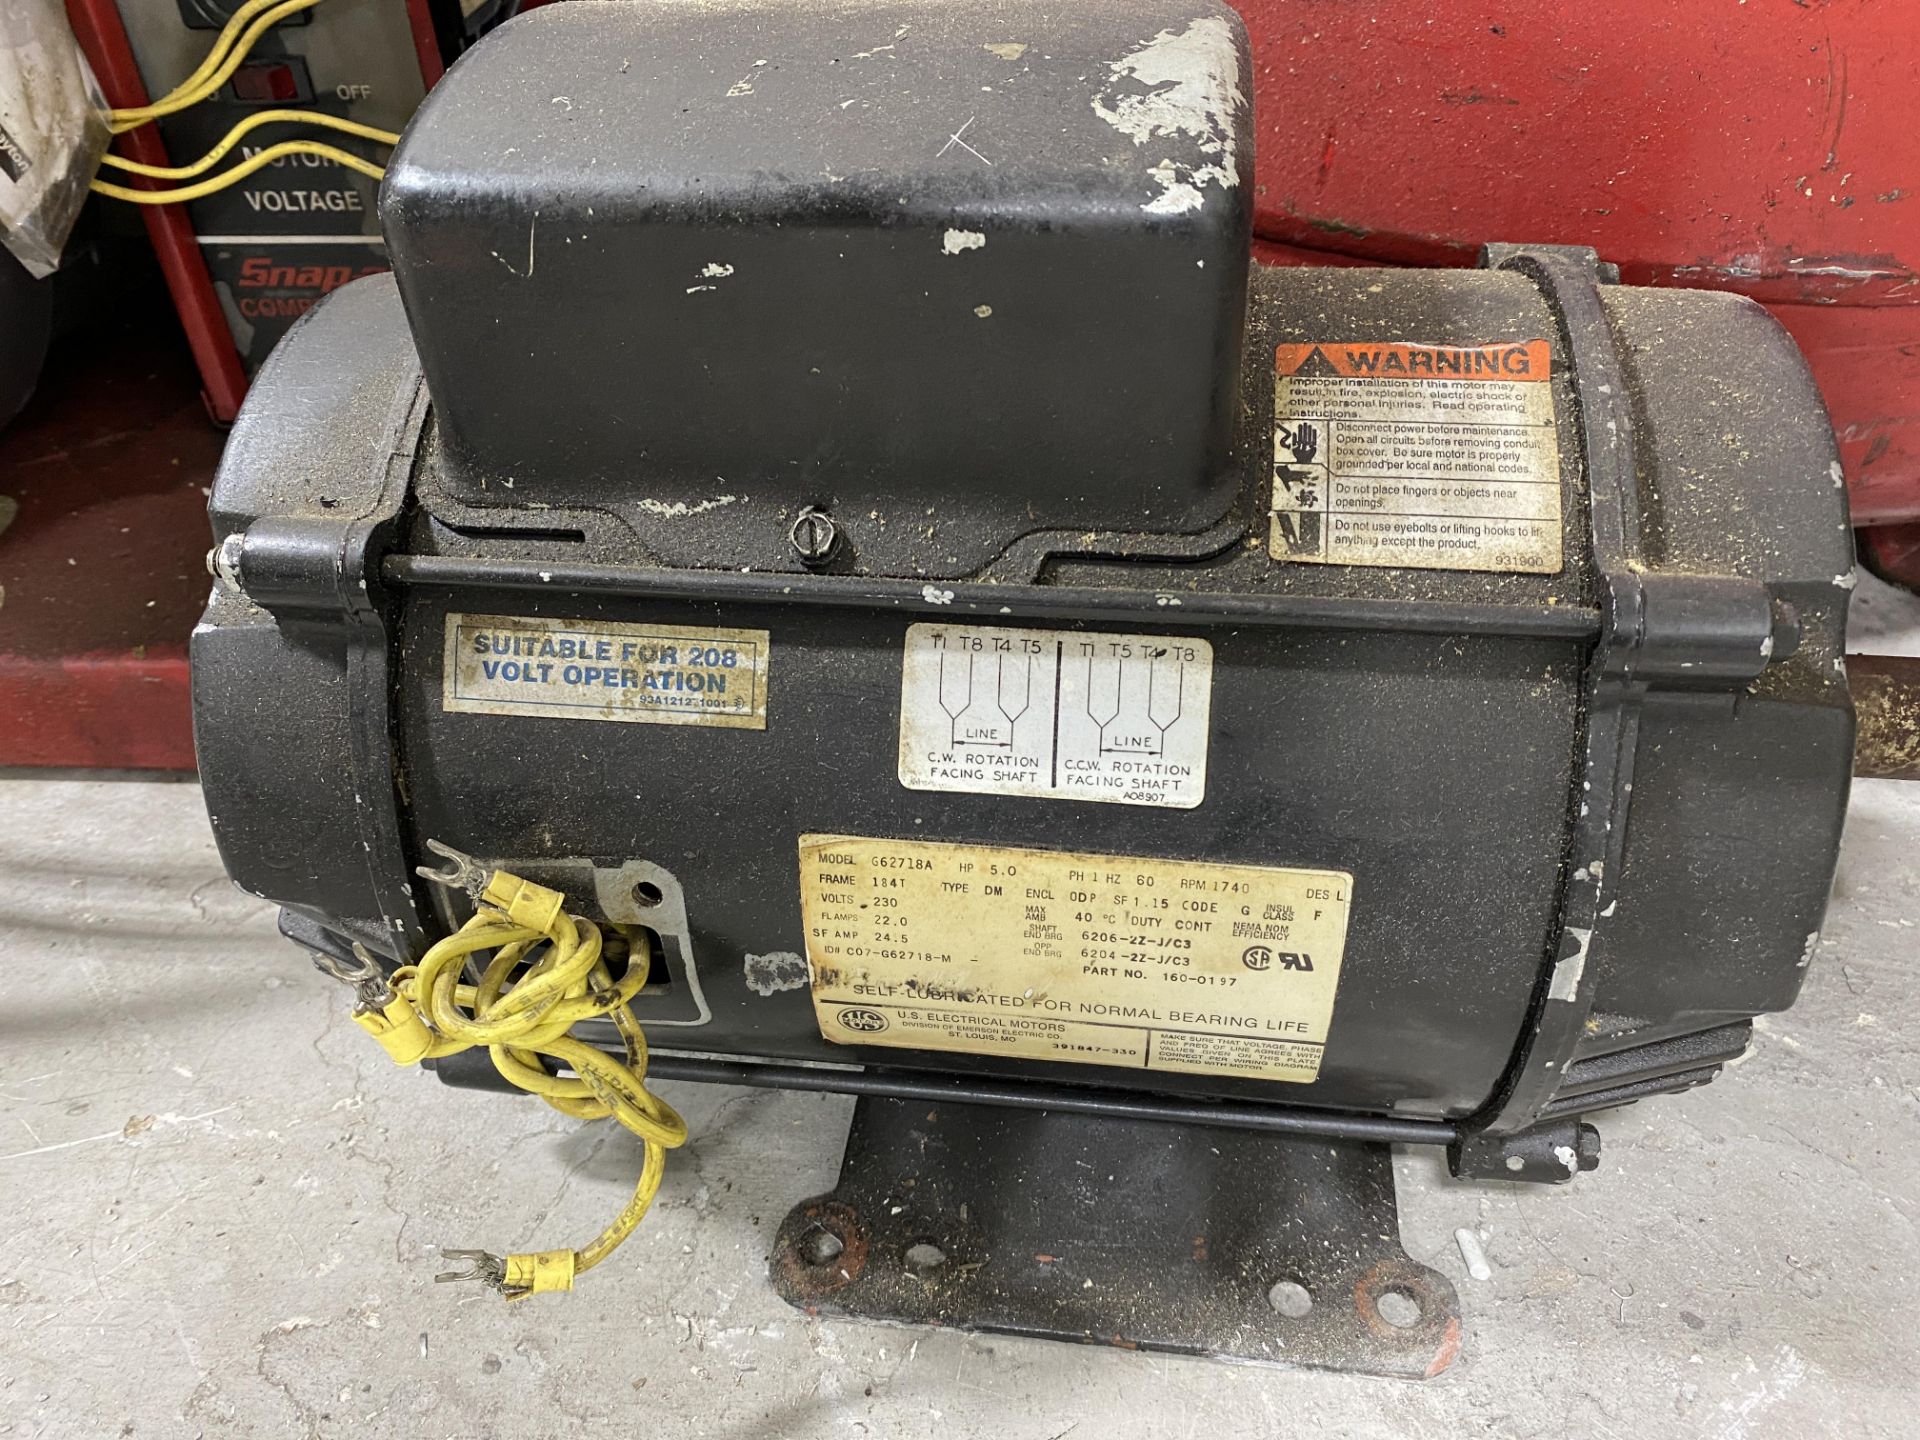 Snap-On Upright Air Compressor (Needs To Be Put Together) M: DRA780V - Image 4 of 5